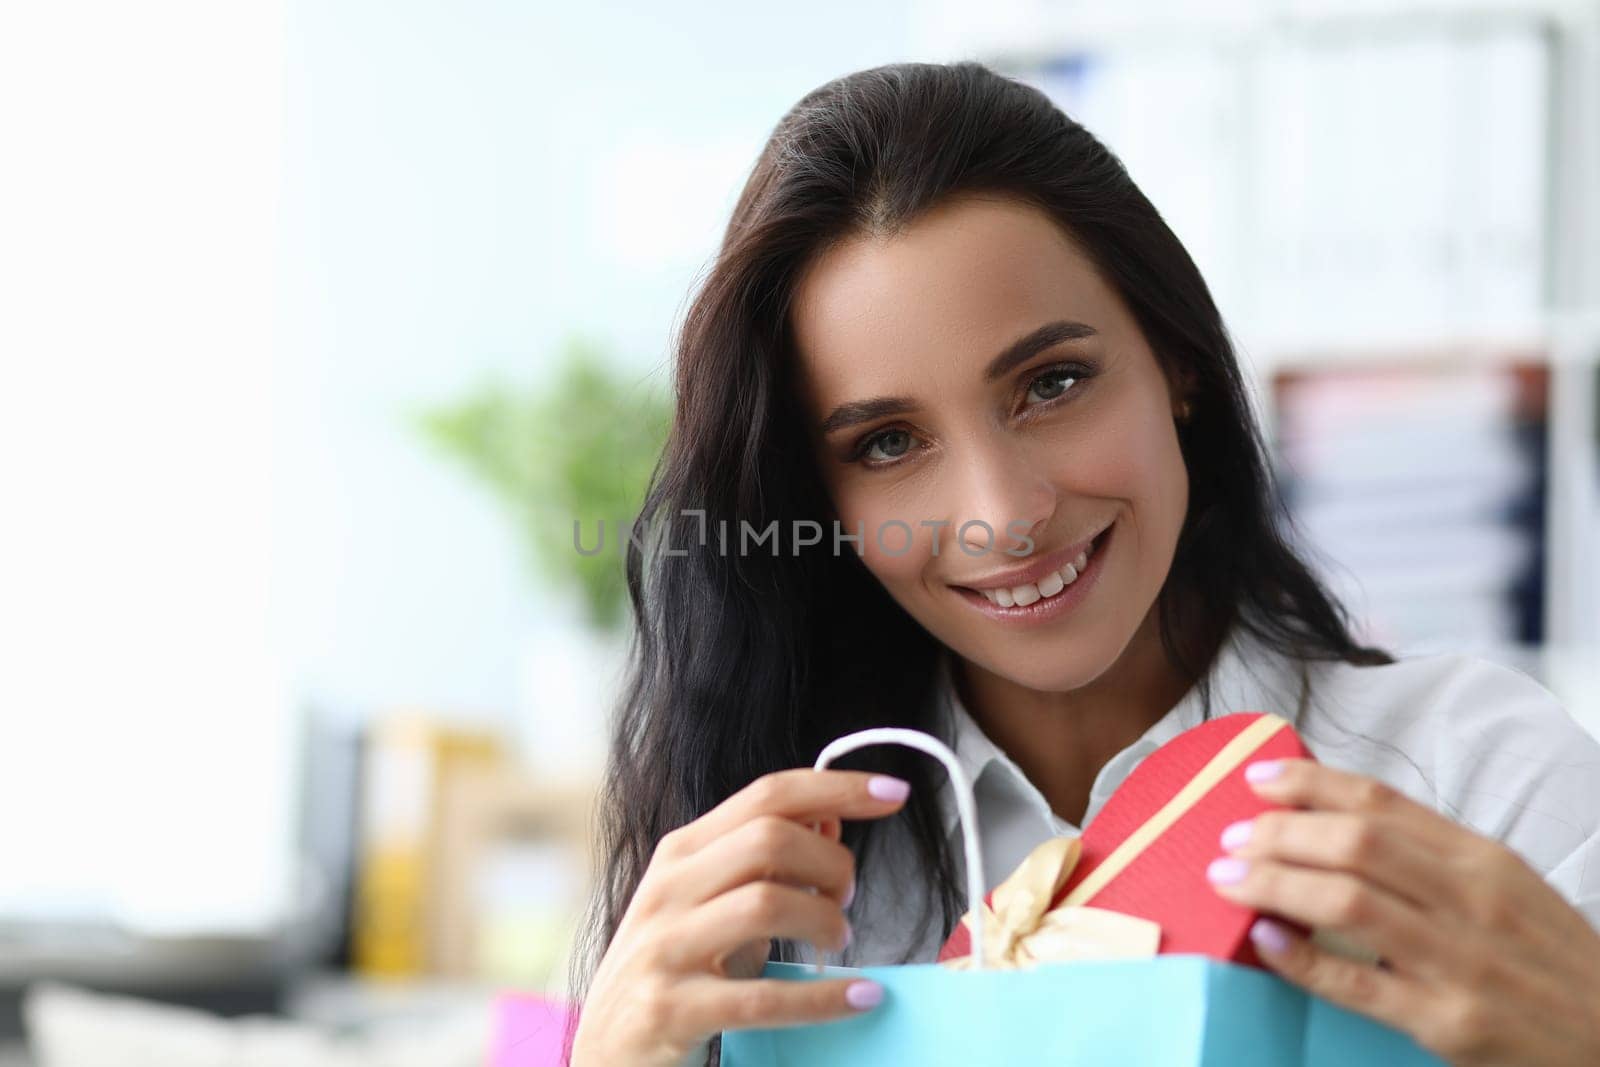 Smiling beautiful woman takes out gift from package by kuprevich